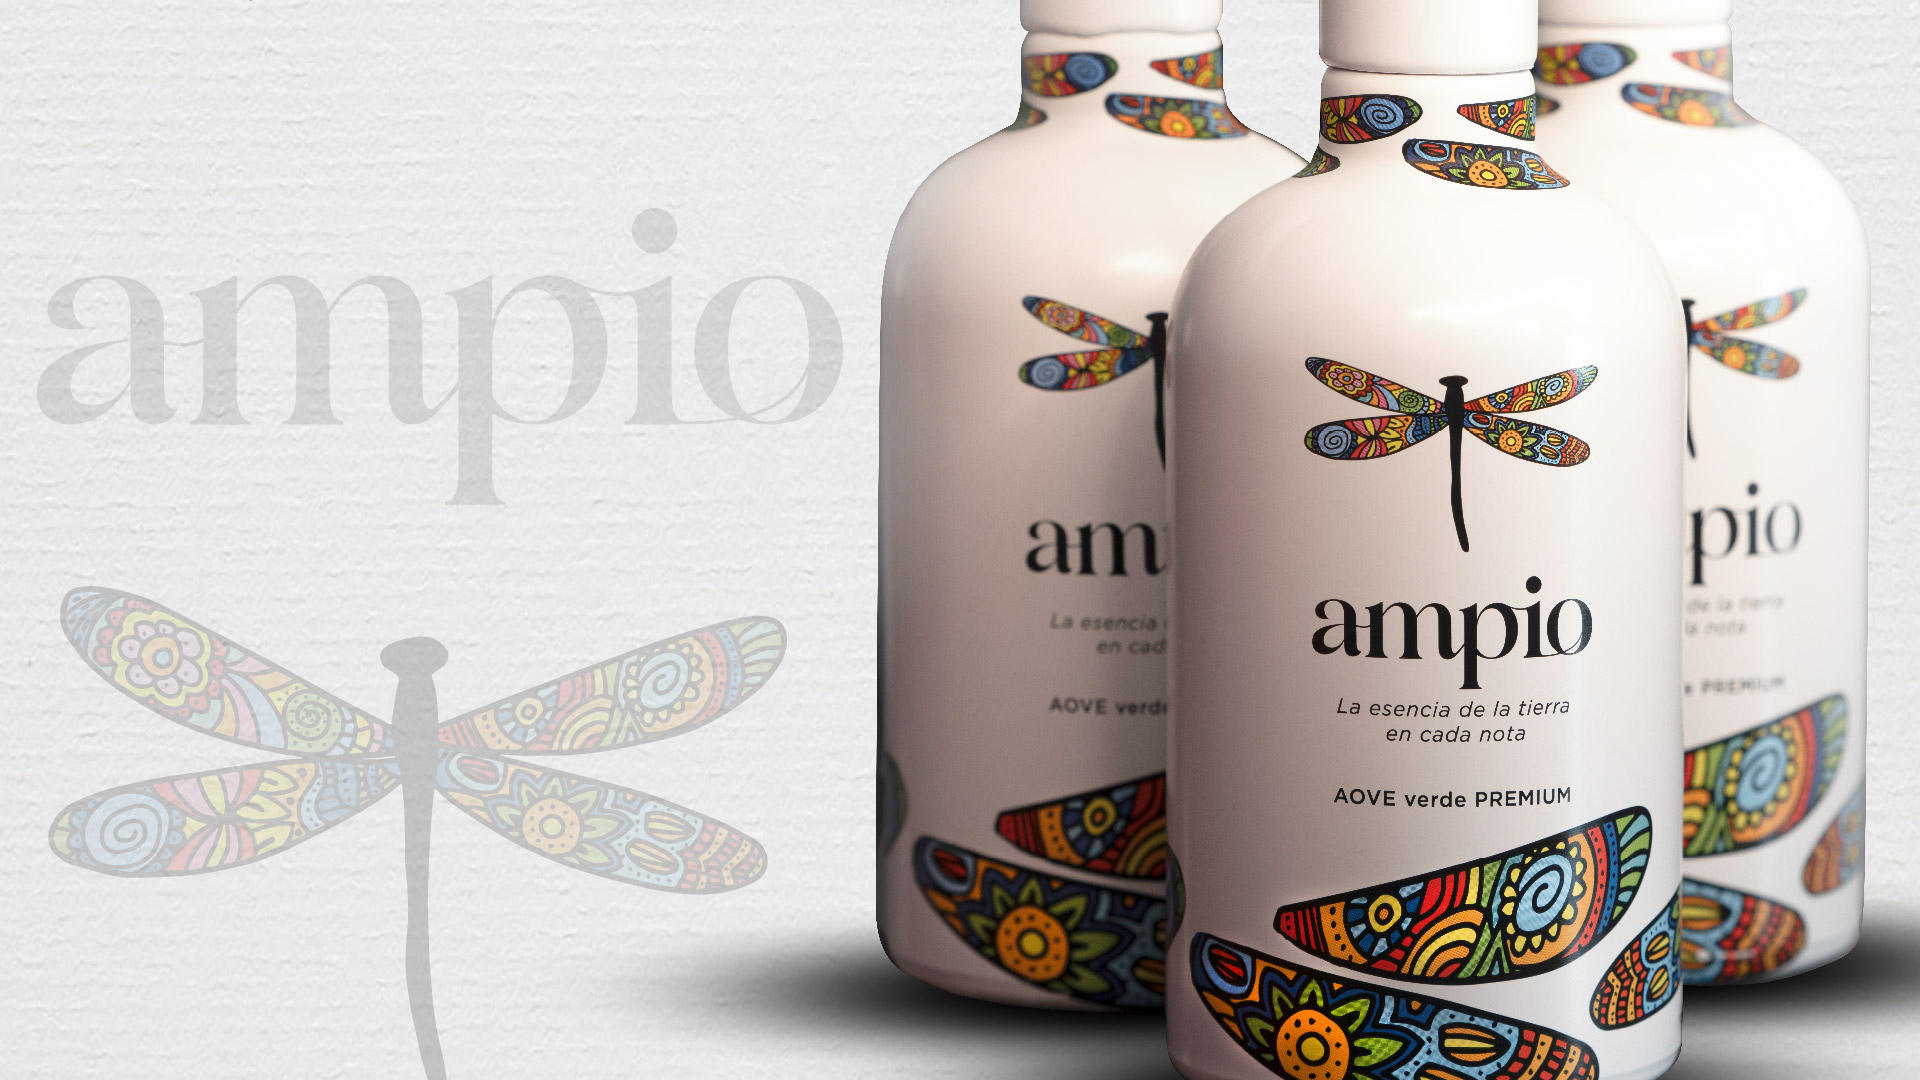 Graphic and creative design of extra virgin olive oil labels for AMPIO ACEITE